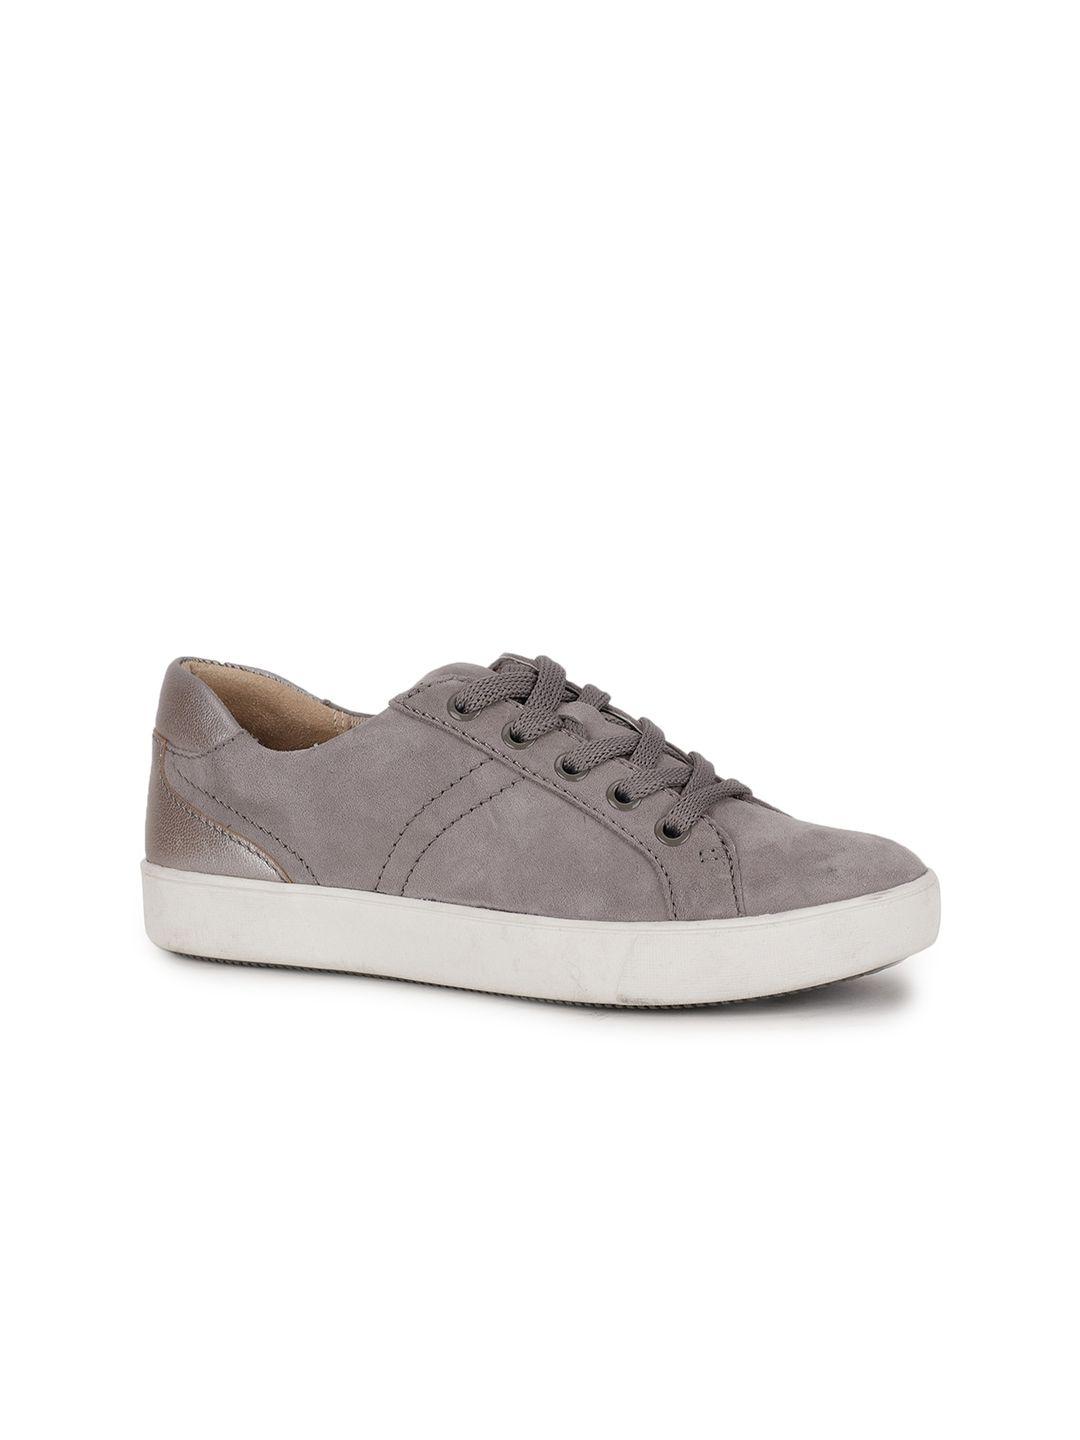 naturalizer-women-grey-leather-sneakers